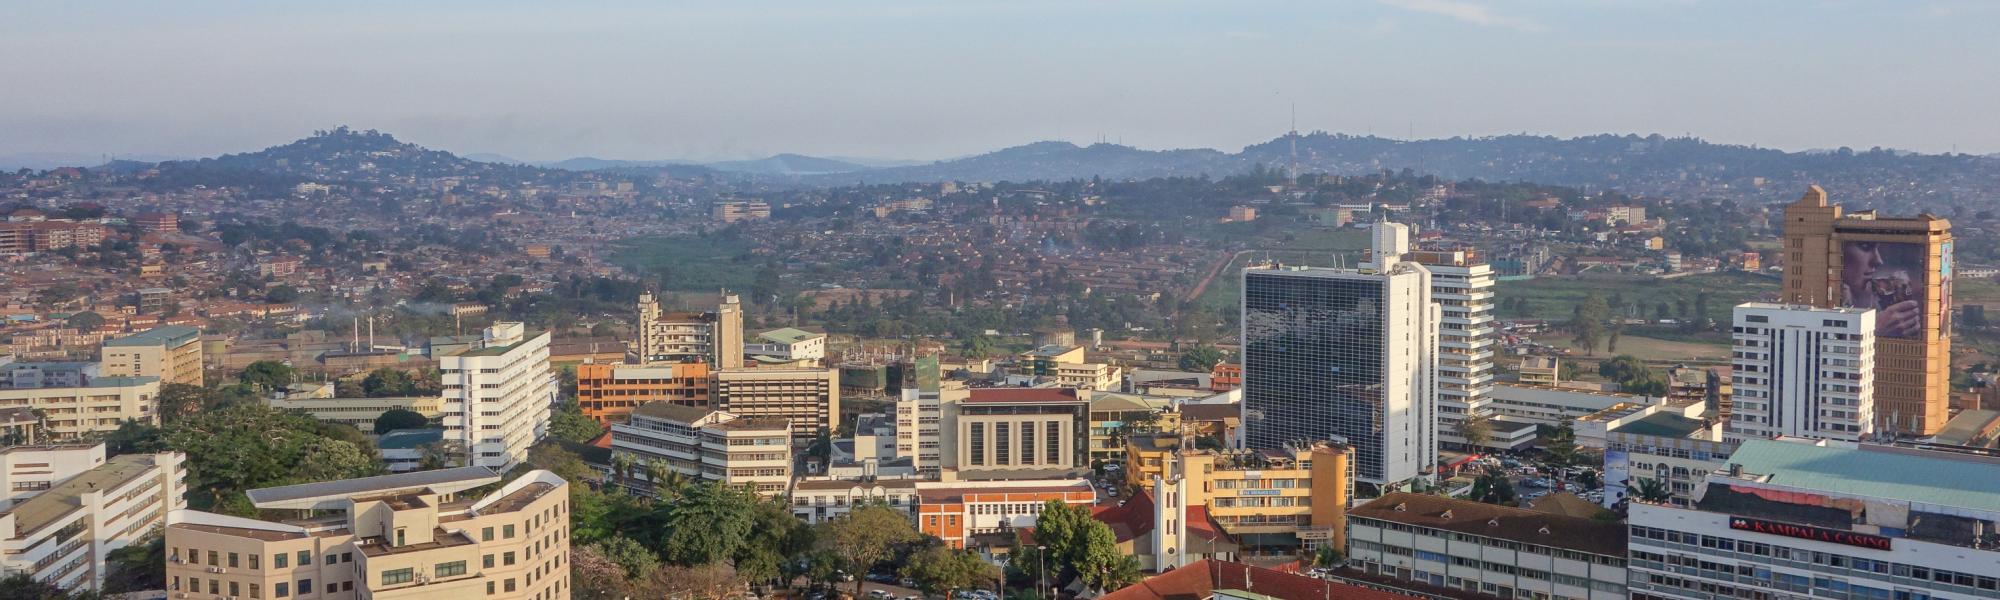 View of the city of Kampala